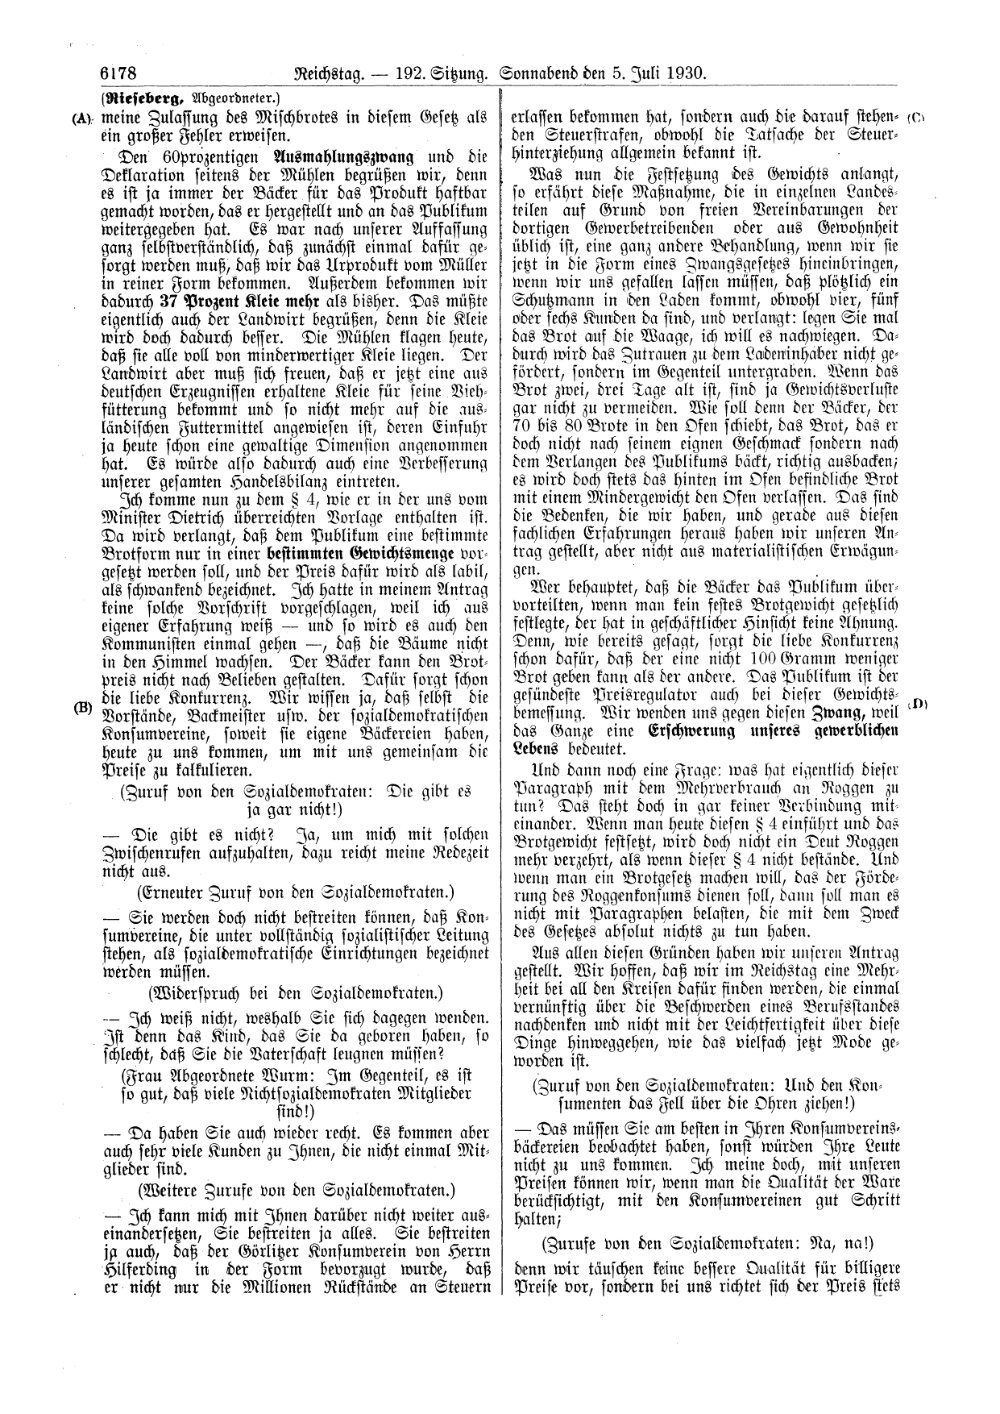 Scan of page 6178